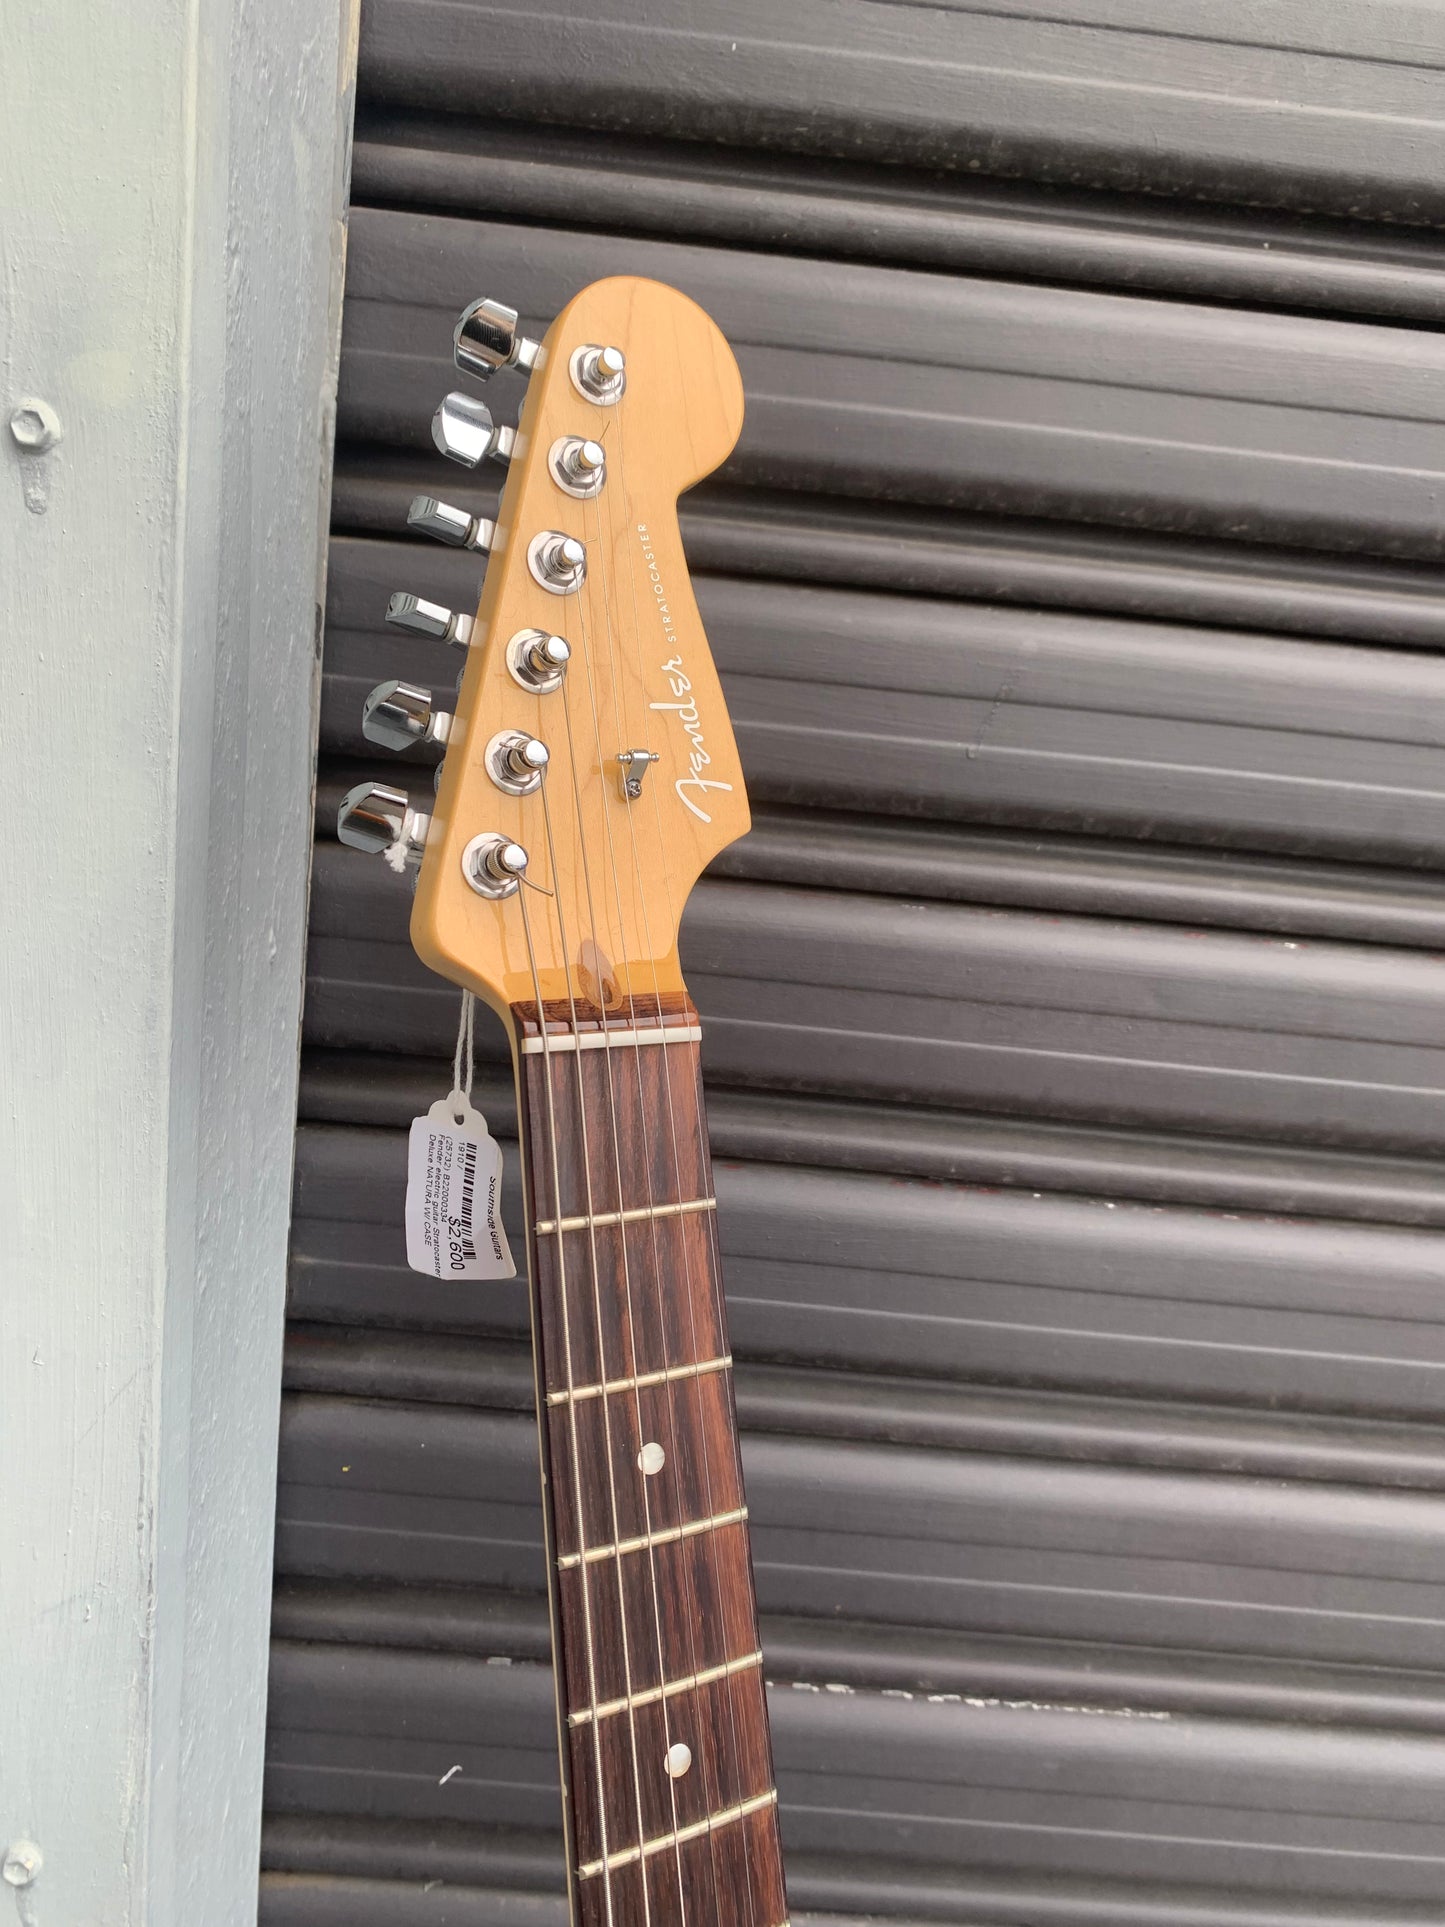 Fender U.S.A. Stratocaster Deluxe in Natural Ash